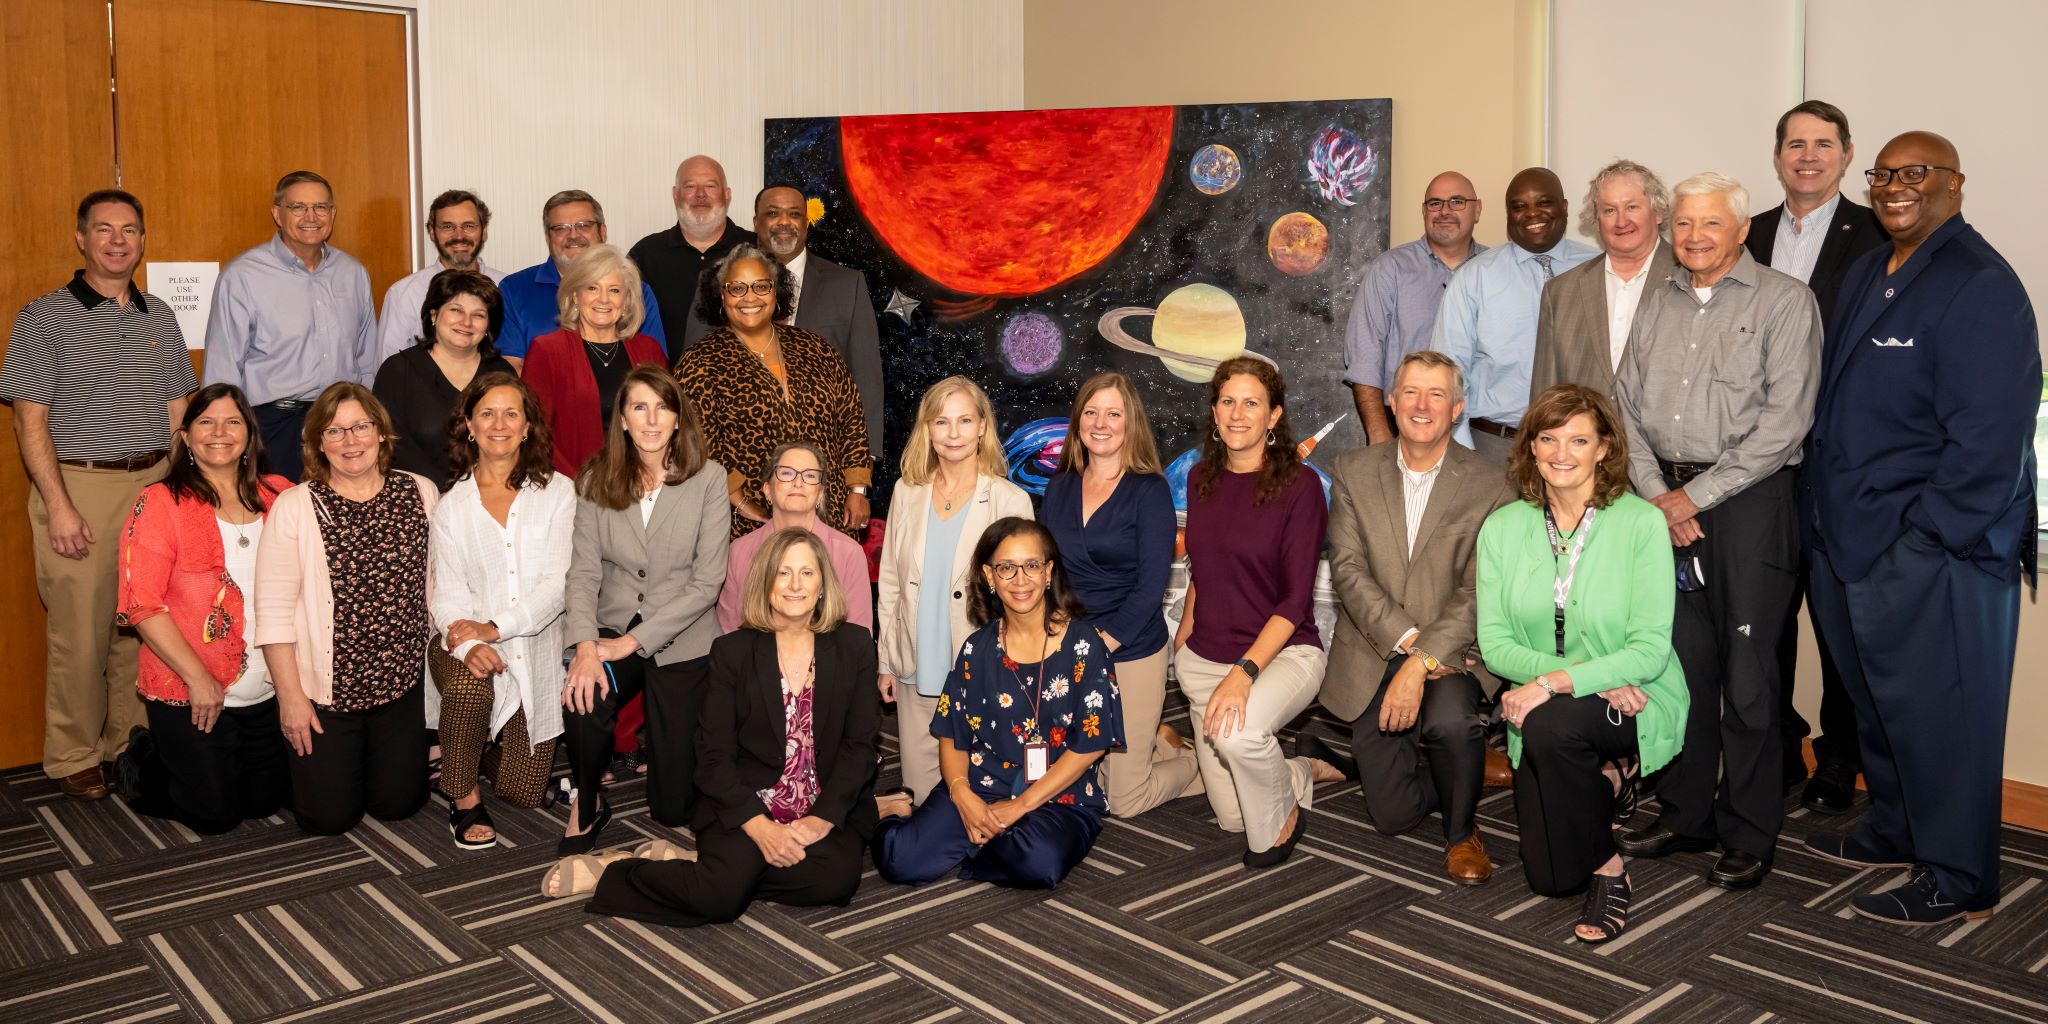 Members of Marshall Space Flight Center’s senior leadership stand in front of the painting they created during a team-building exercise at an offsite event this summer. 